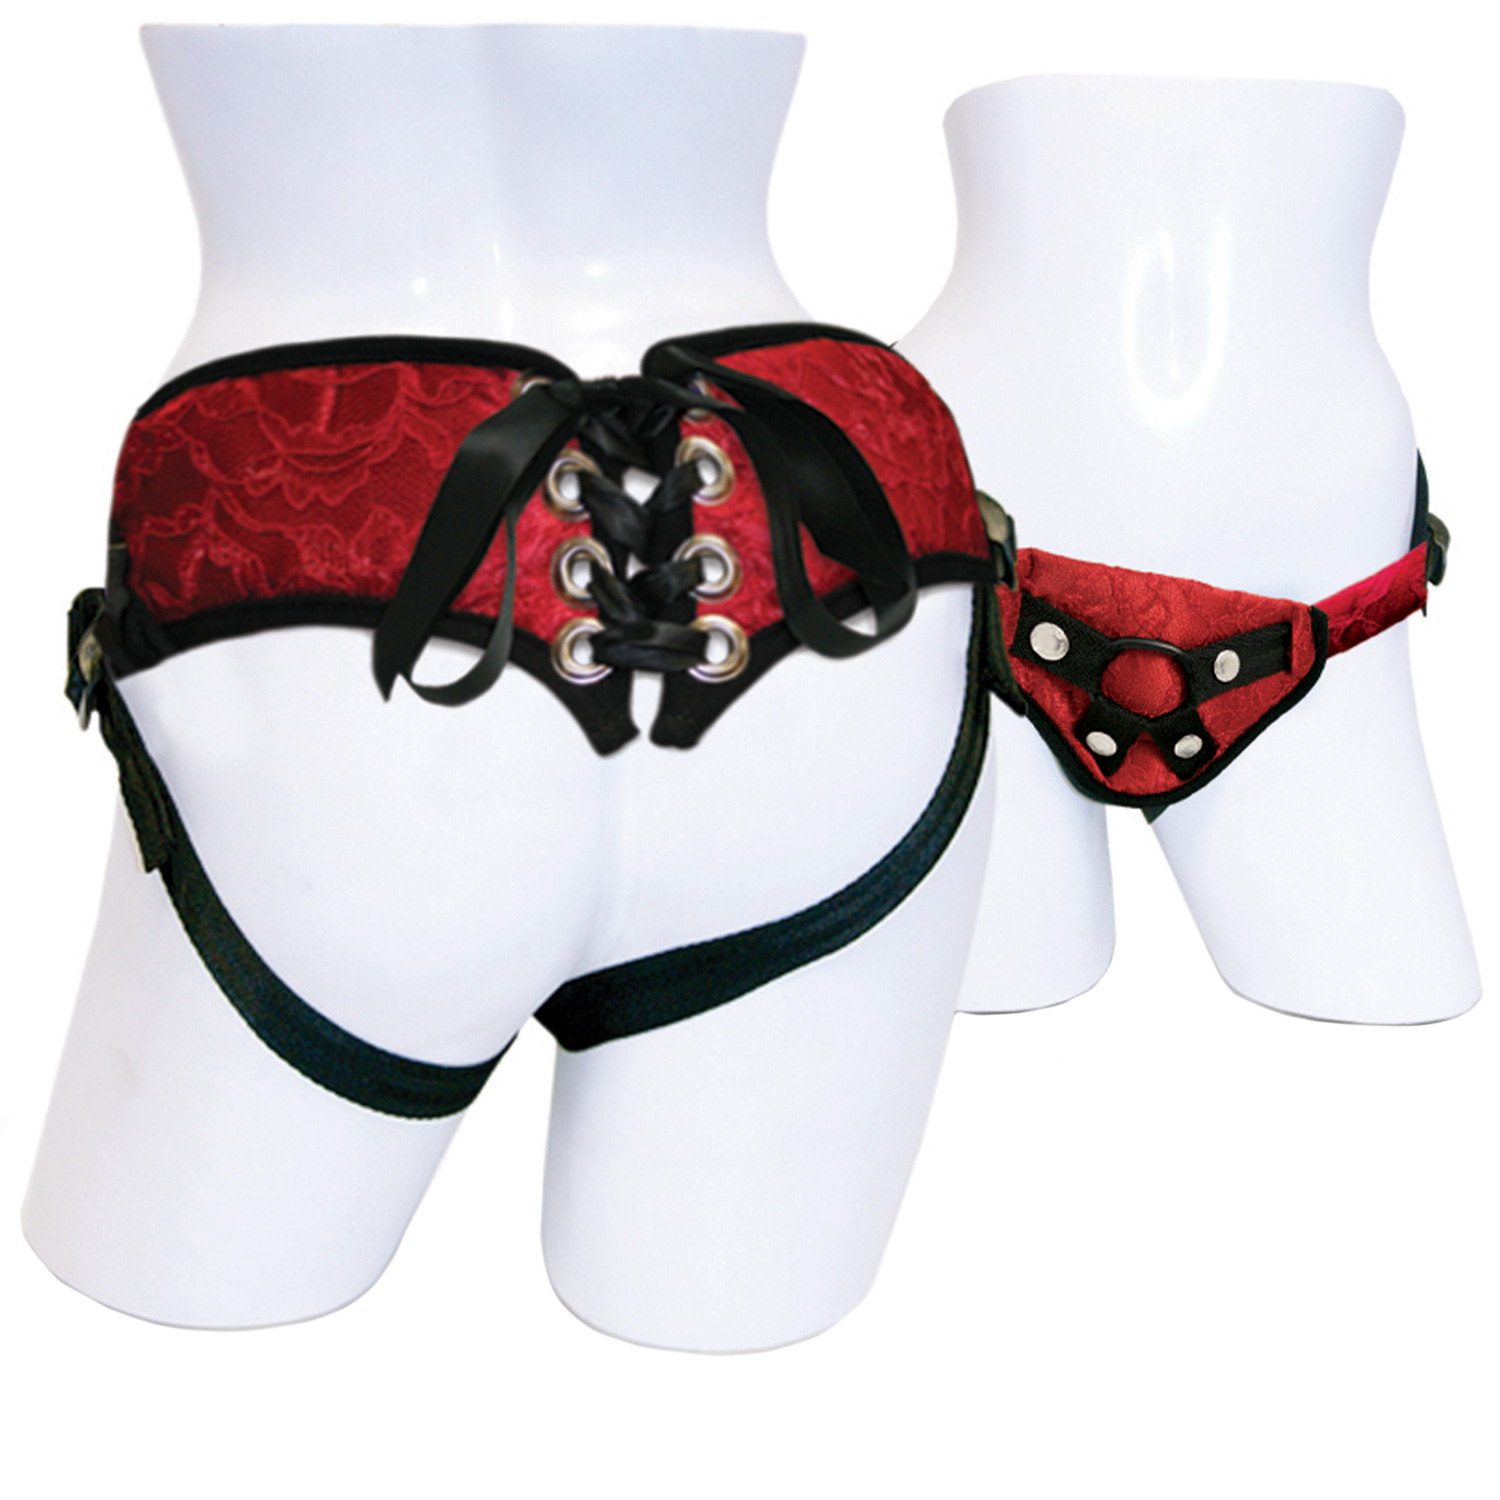 Sportsheets Red Lace Corsette Strap-On Harness - Röd